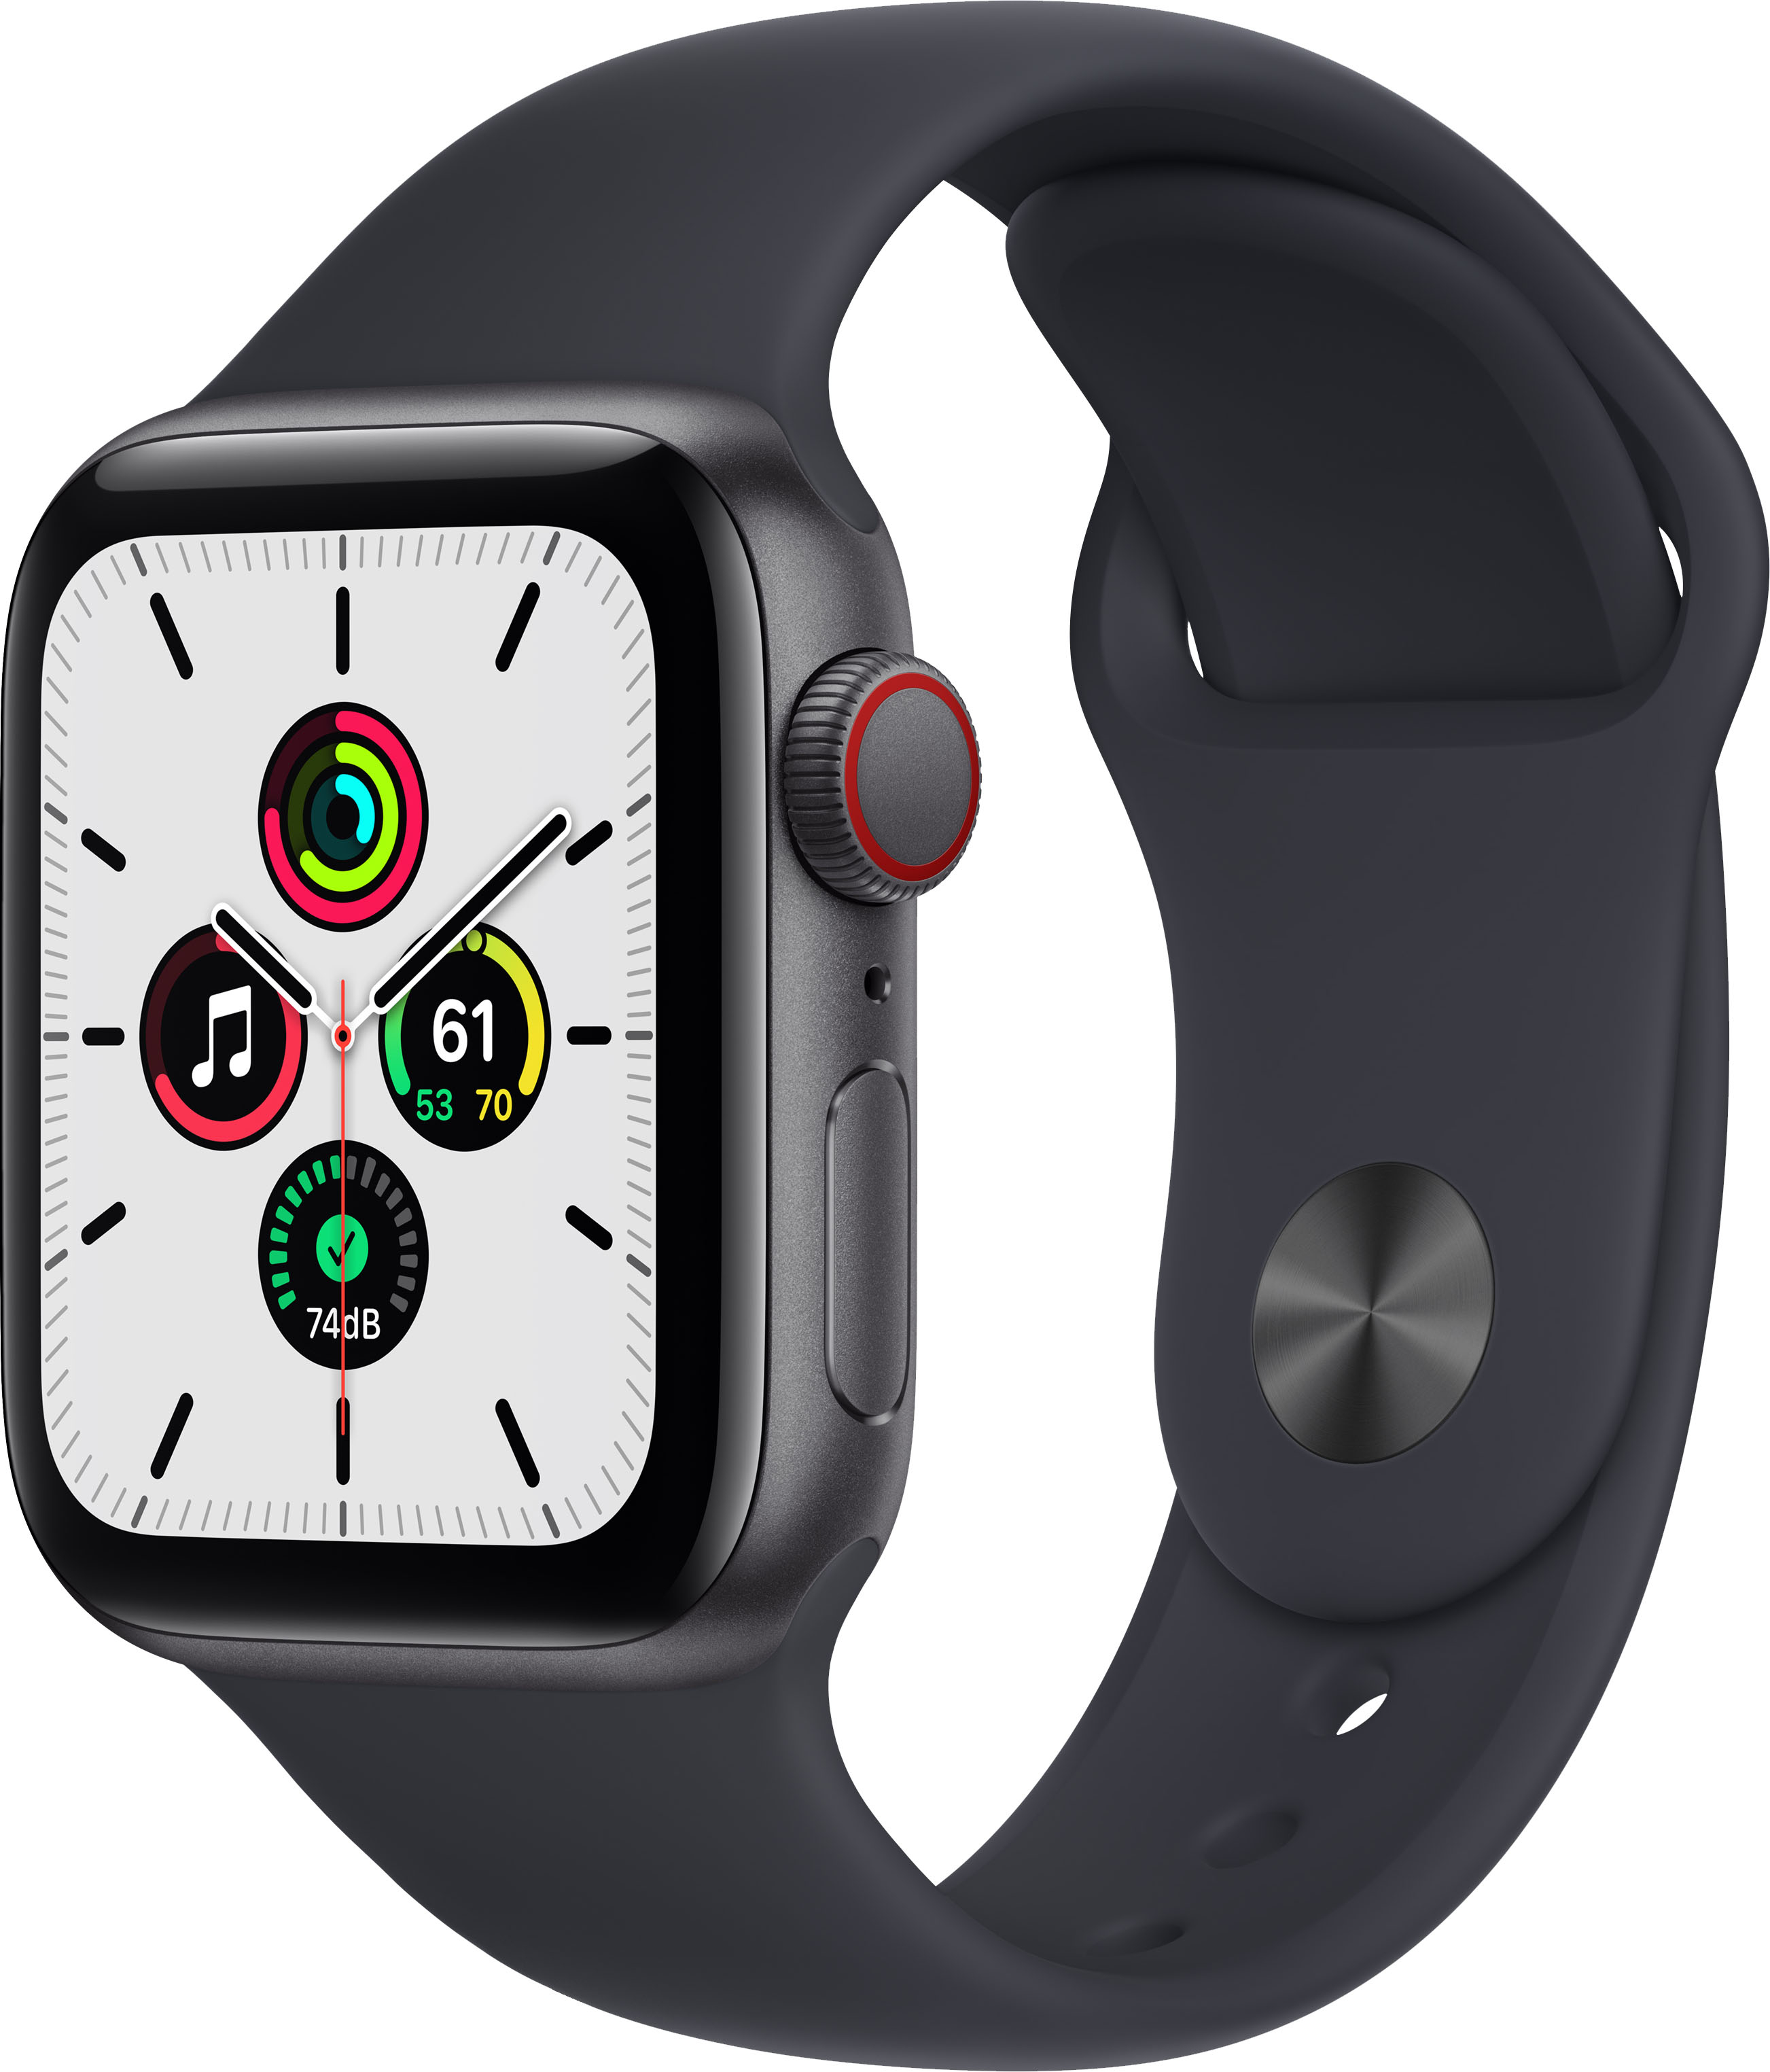 Apple Watch SE (GPS + Cellular) 40mm Space Gray Aluminum Case with Midnight  Sport Band - Space Gray